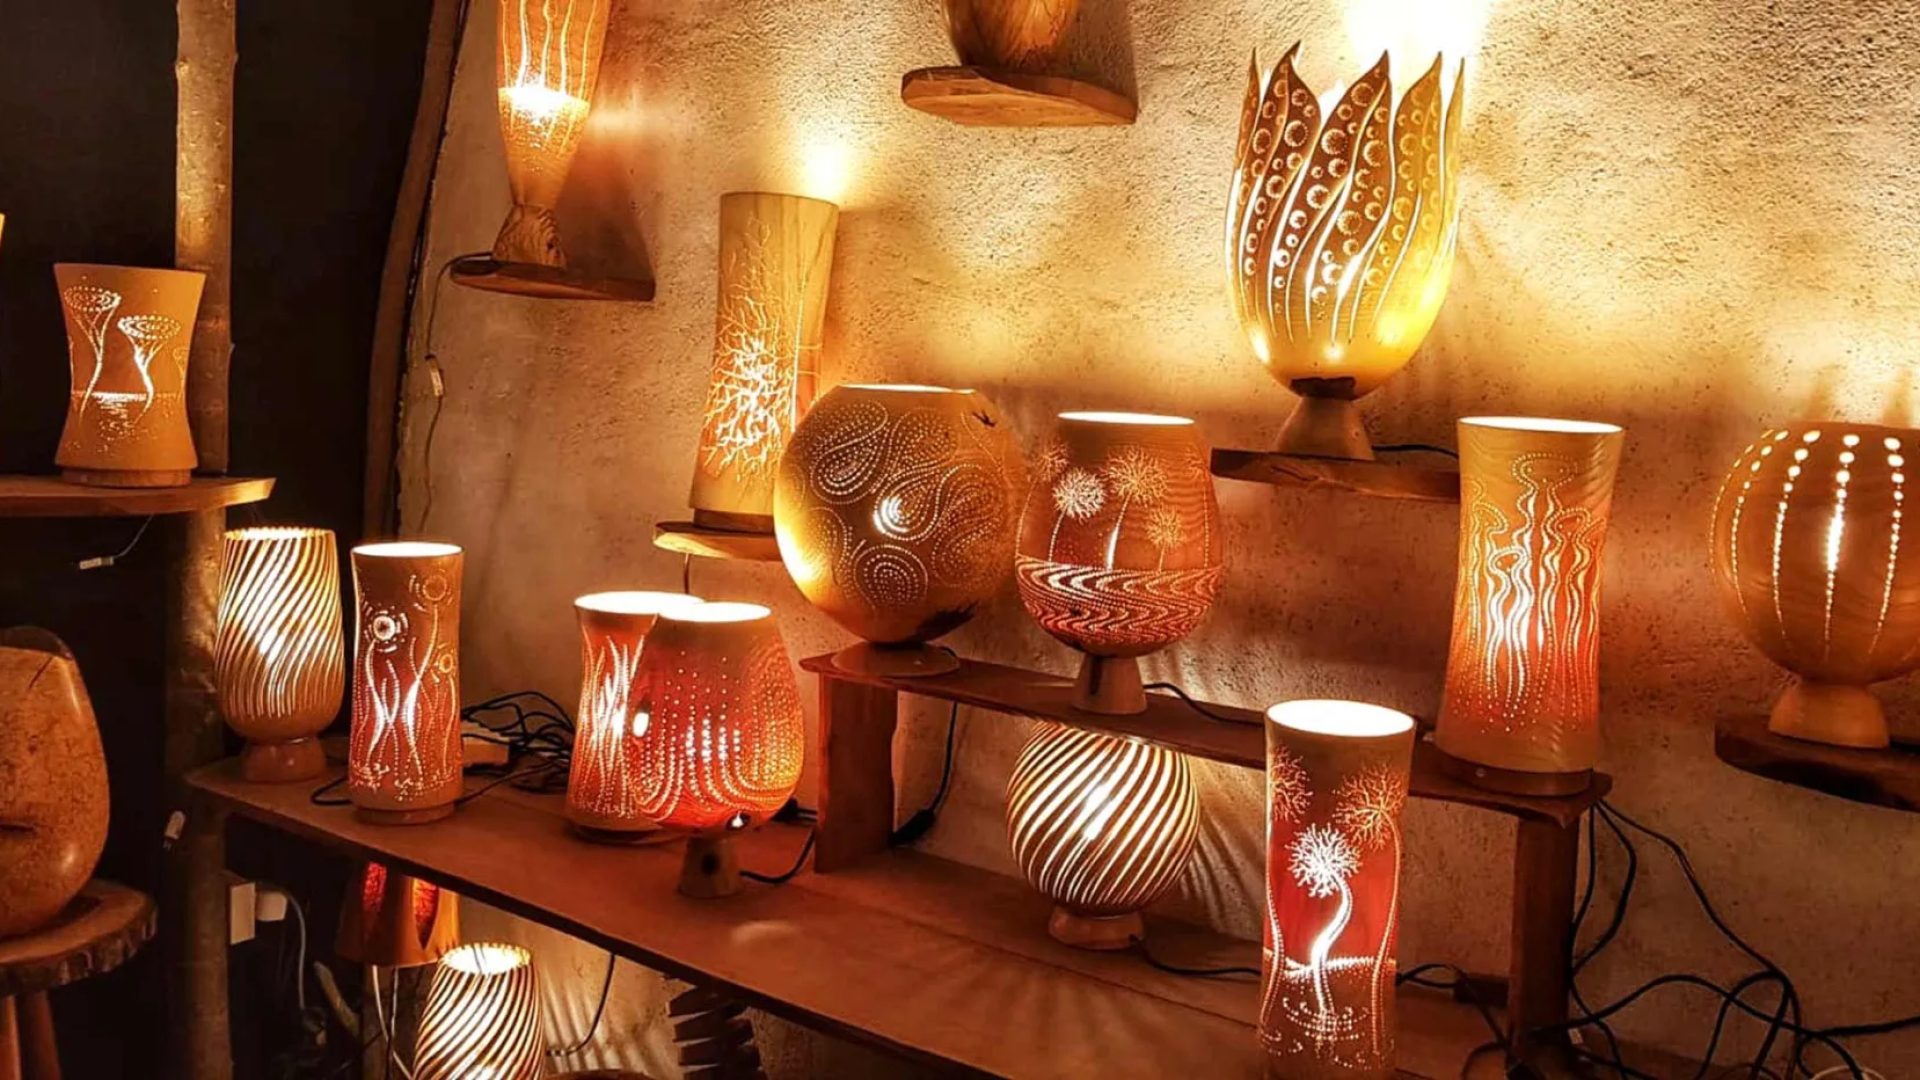 Handmade gifts "Made in Haute-Loire" thanks to local artists and craftsmen wood lighting